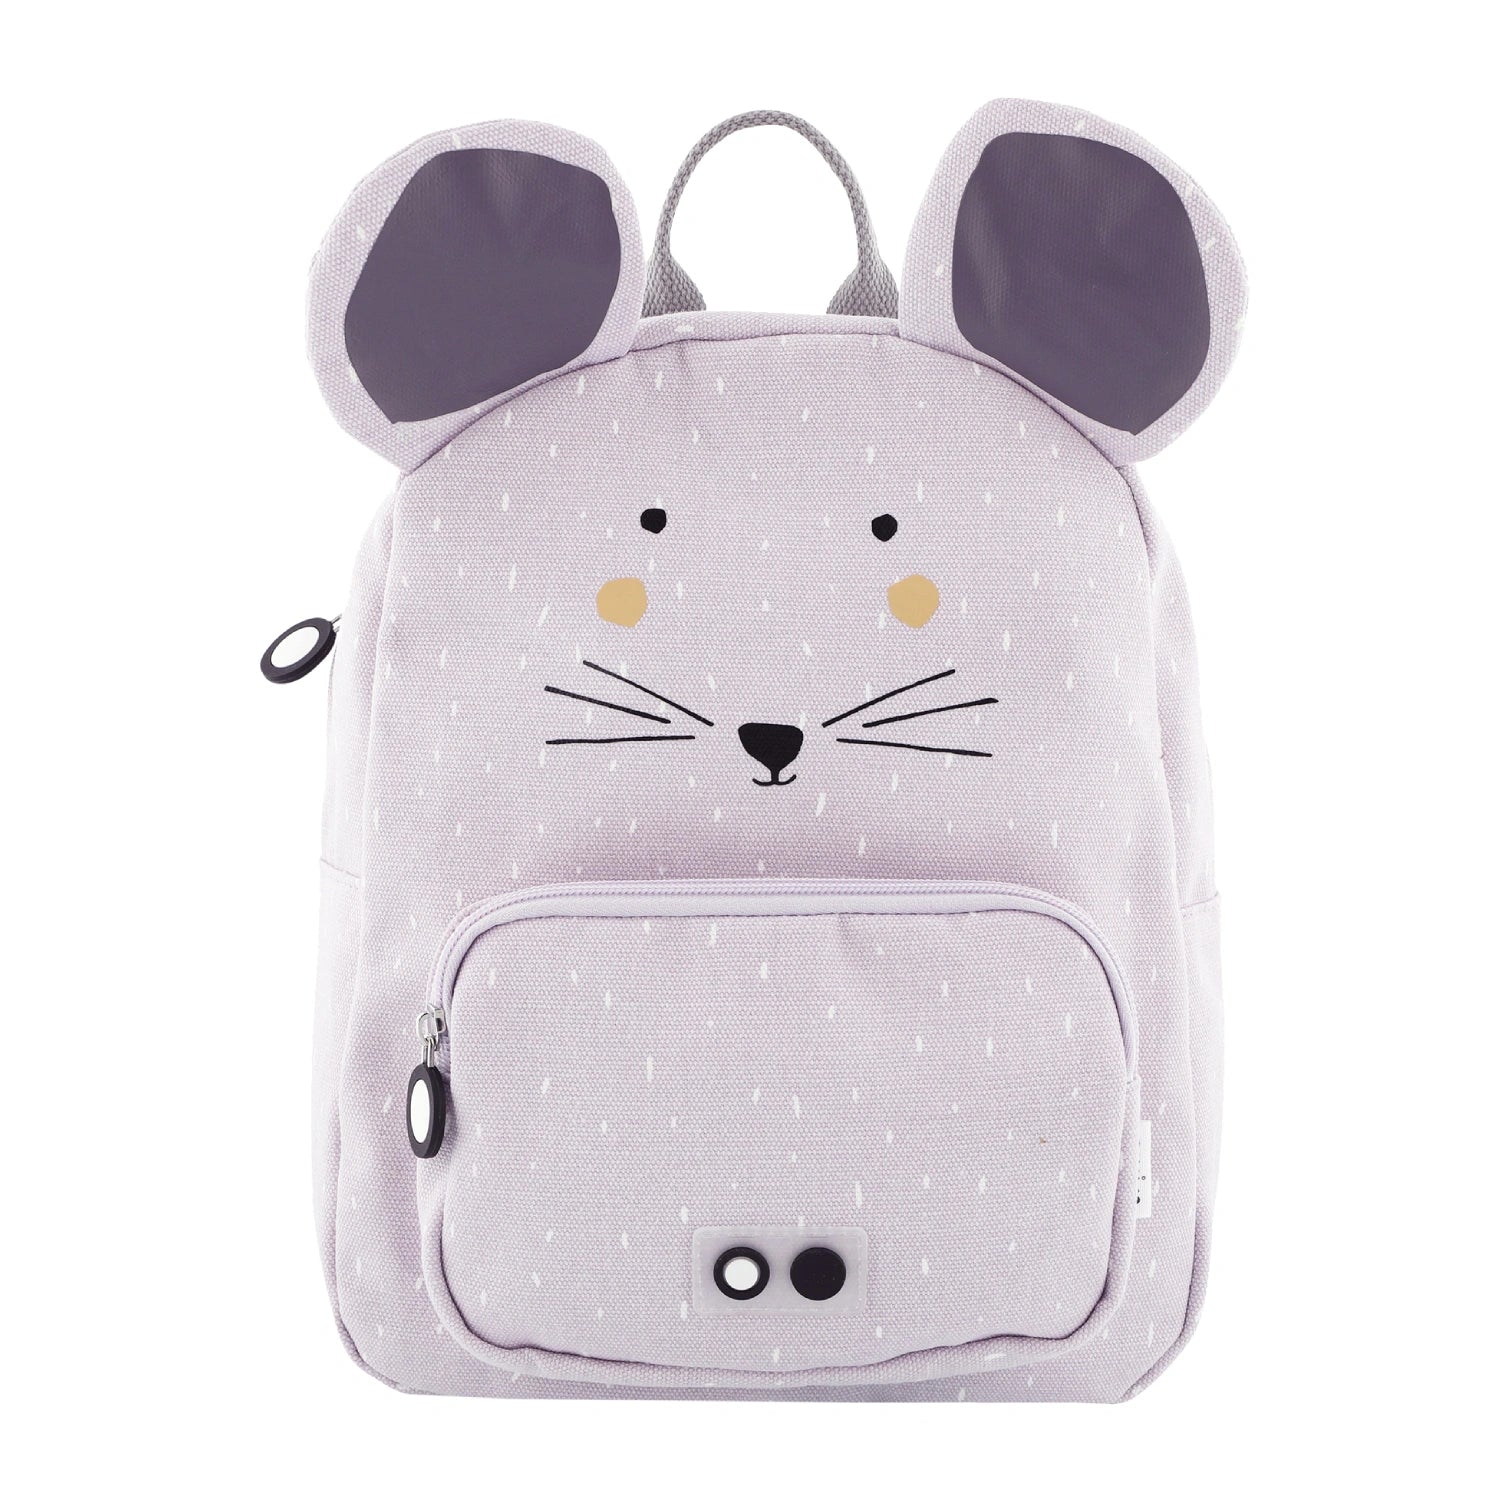 An image of Kids School Backpack - Trixie Bag Collection Mrs. Mouse